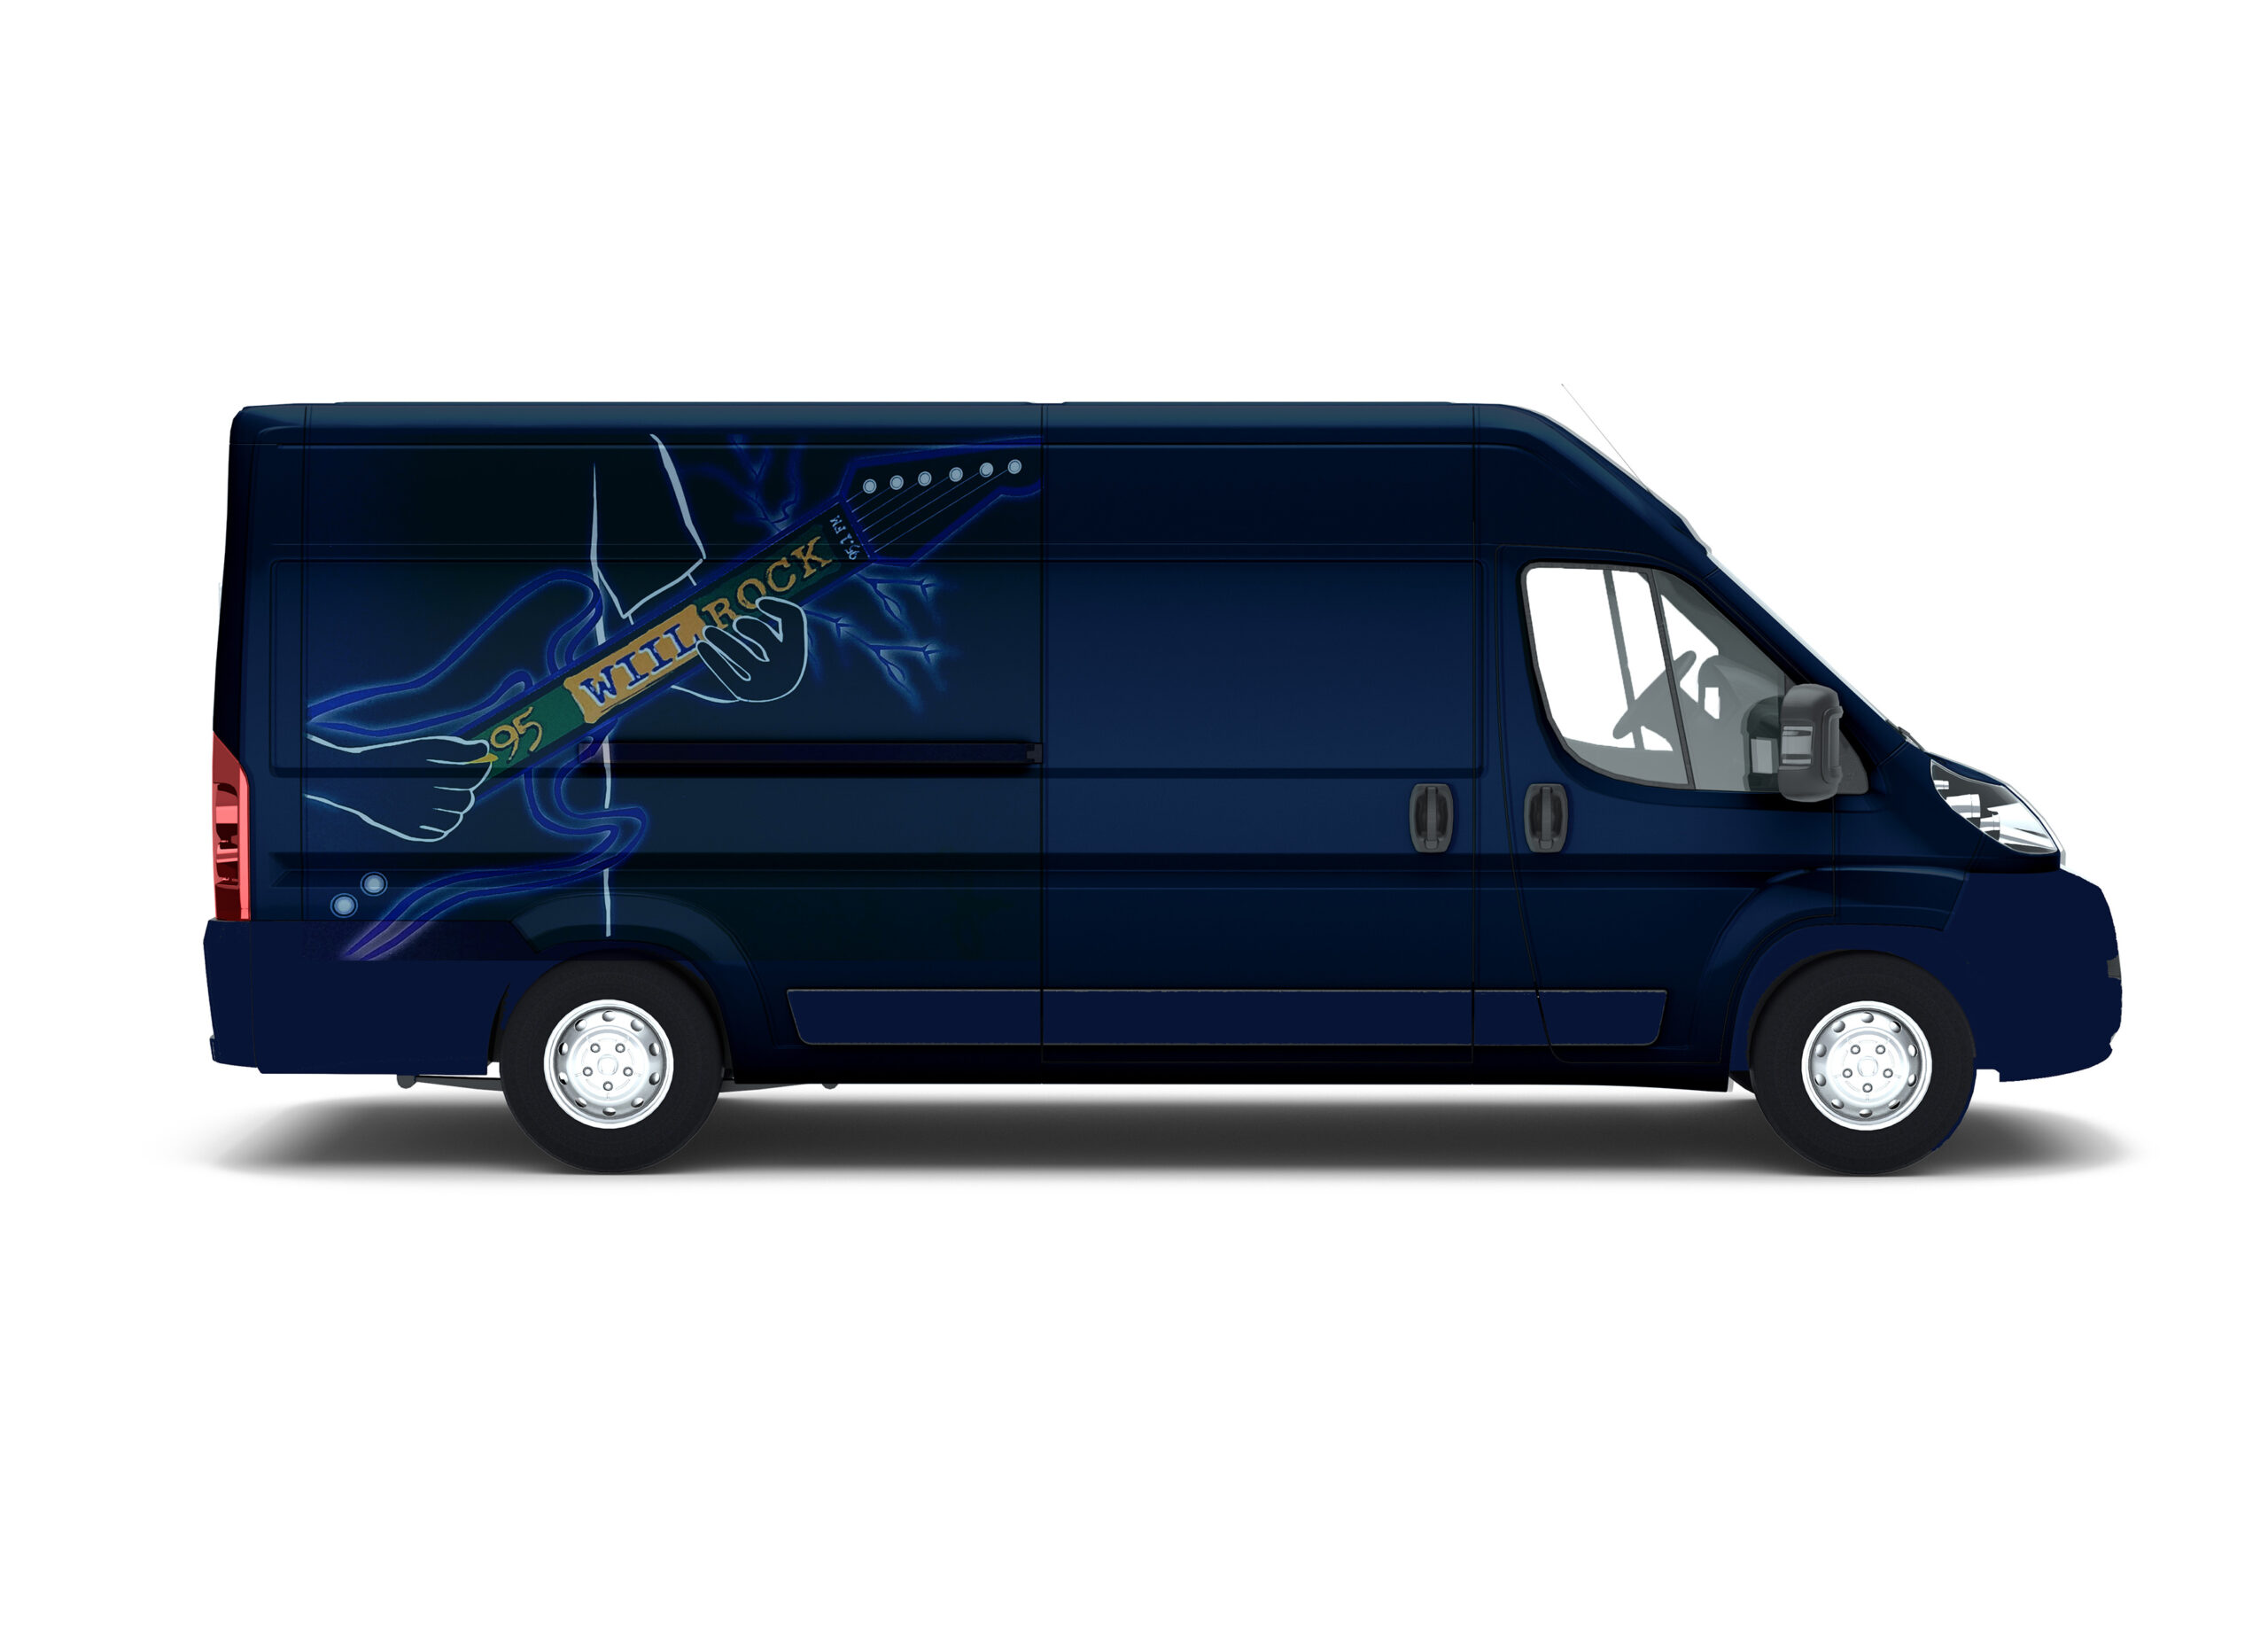 Winning design of local radio station contest. My design was placed on their event travel vans.